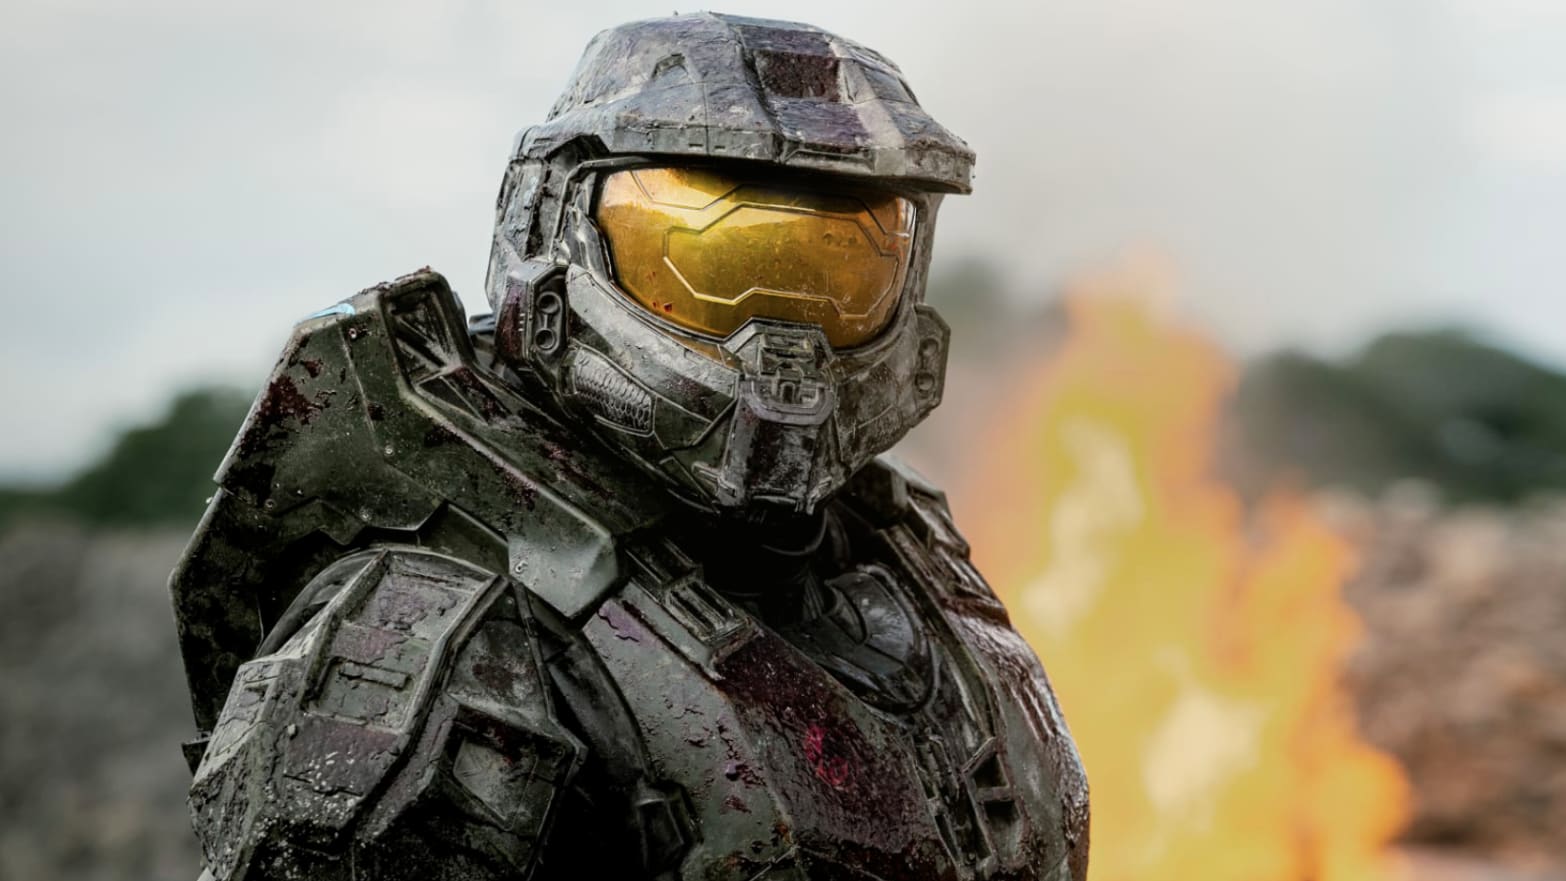 Halo TV series - How to watch Paramount Plus Halo show for FREE in